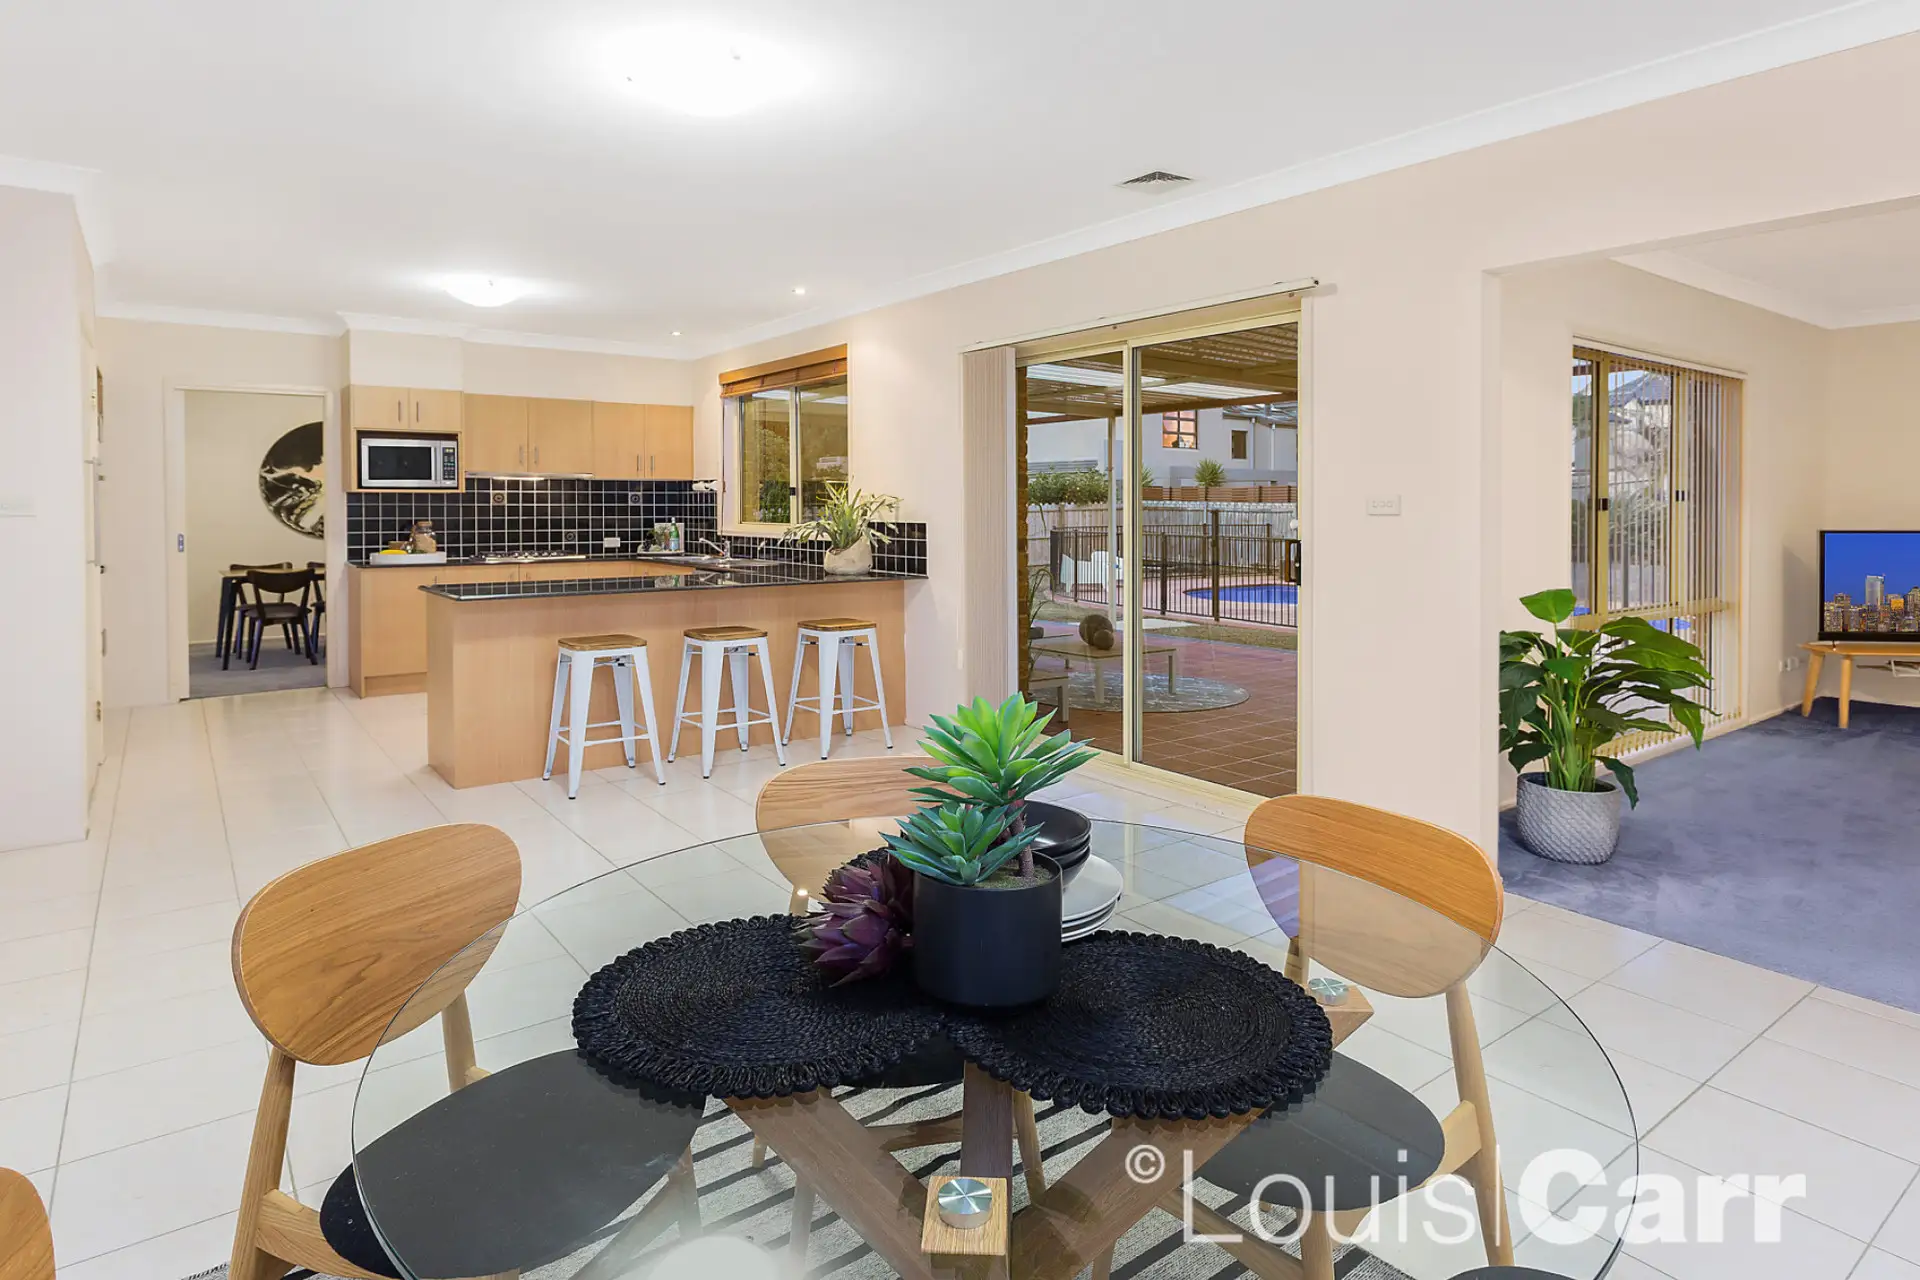 Photo #4: 9 Hermitage Avenue, Kellyville - Sold by Louis Carr Real Estate